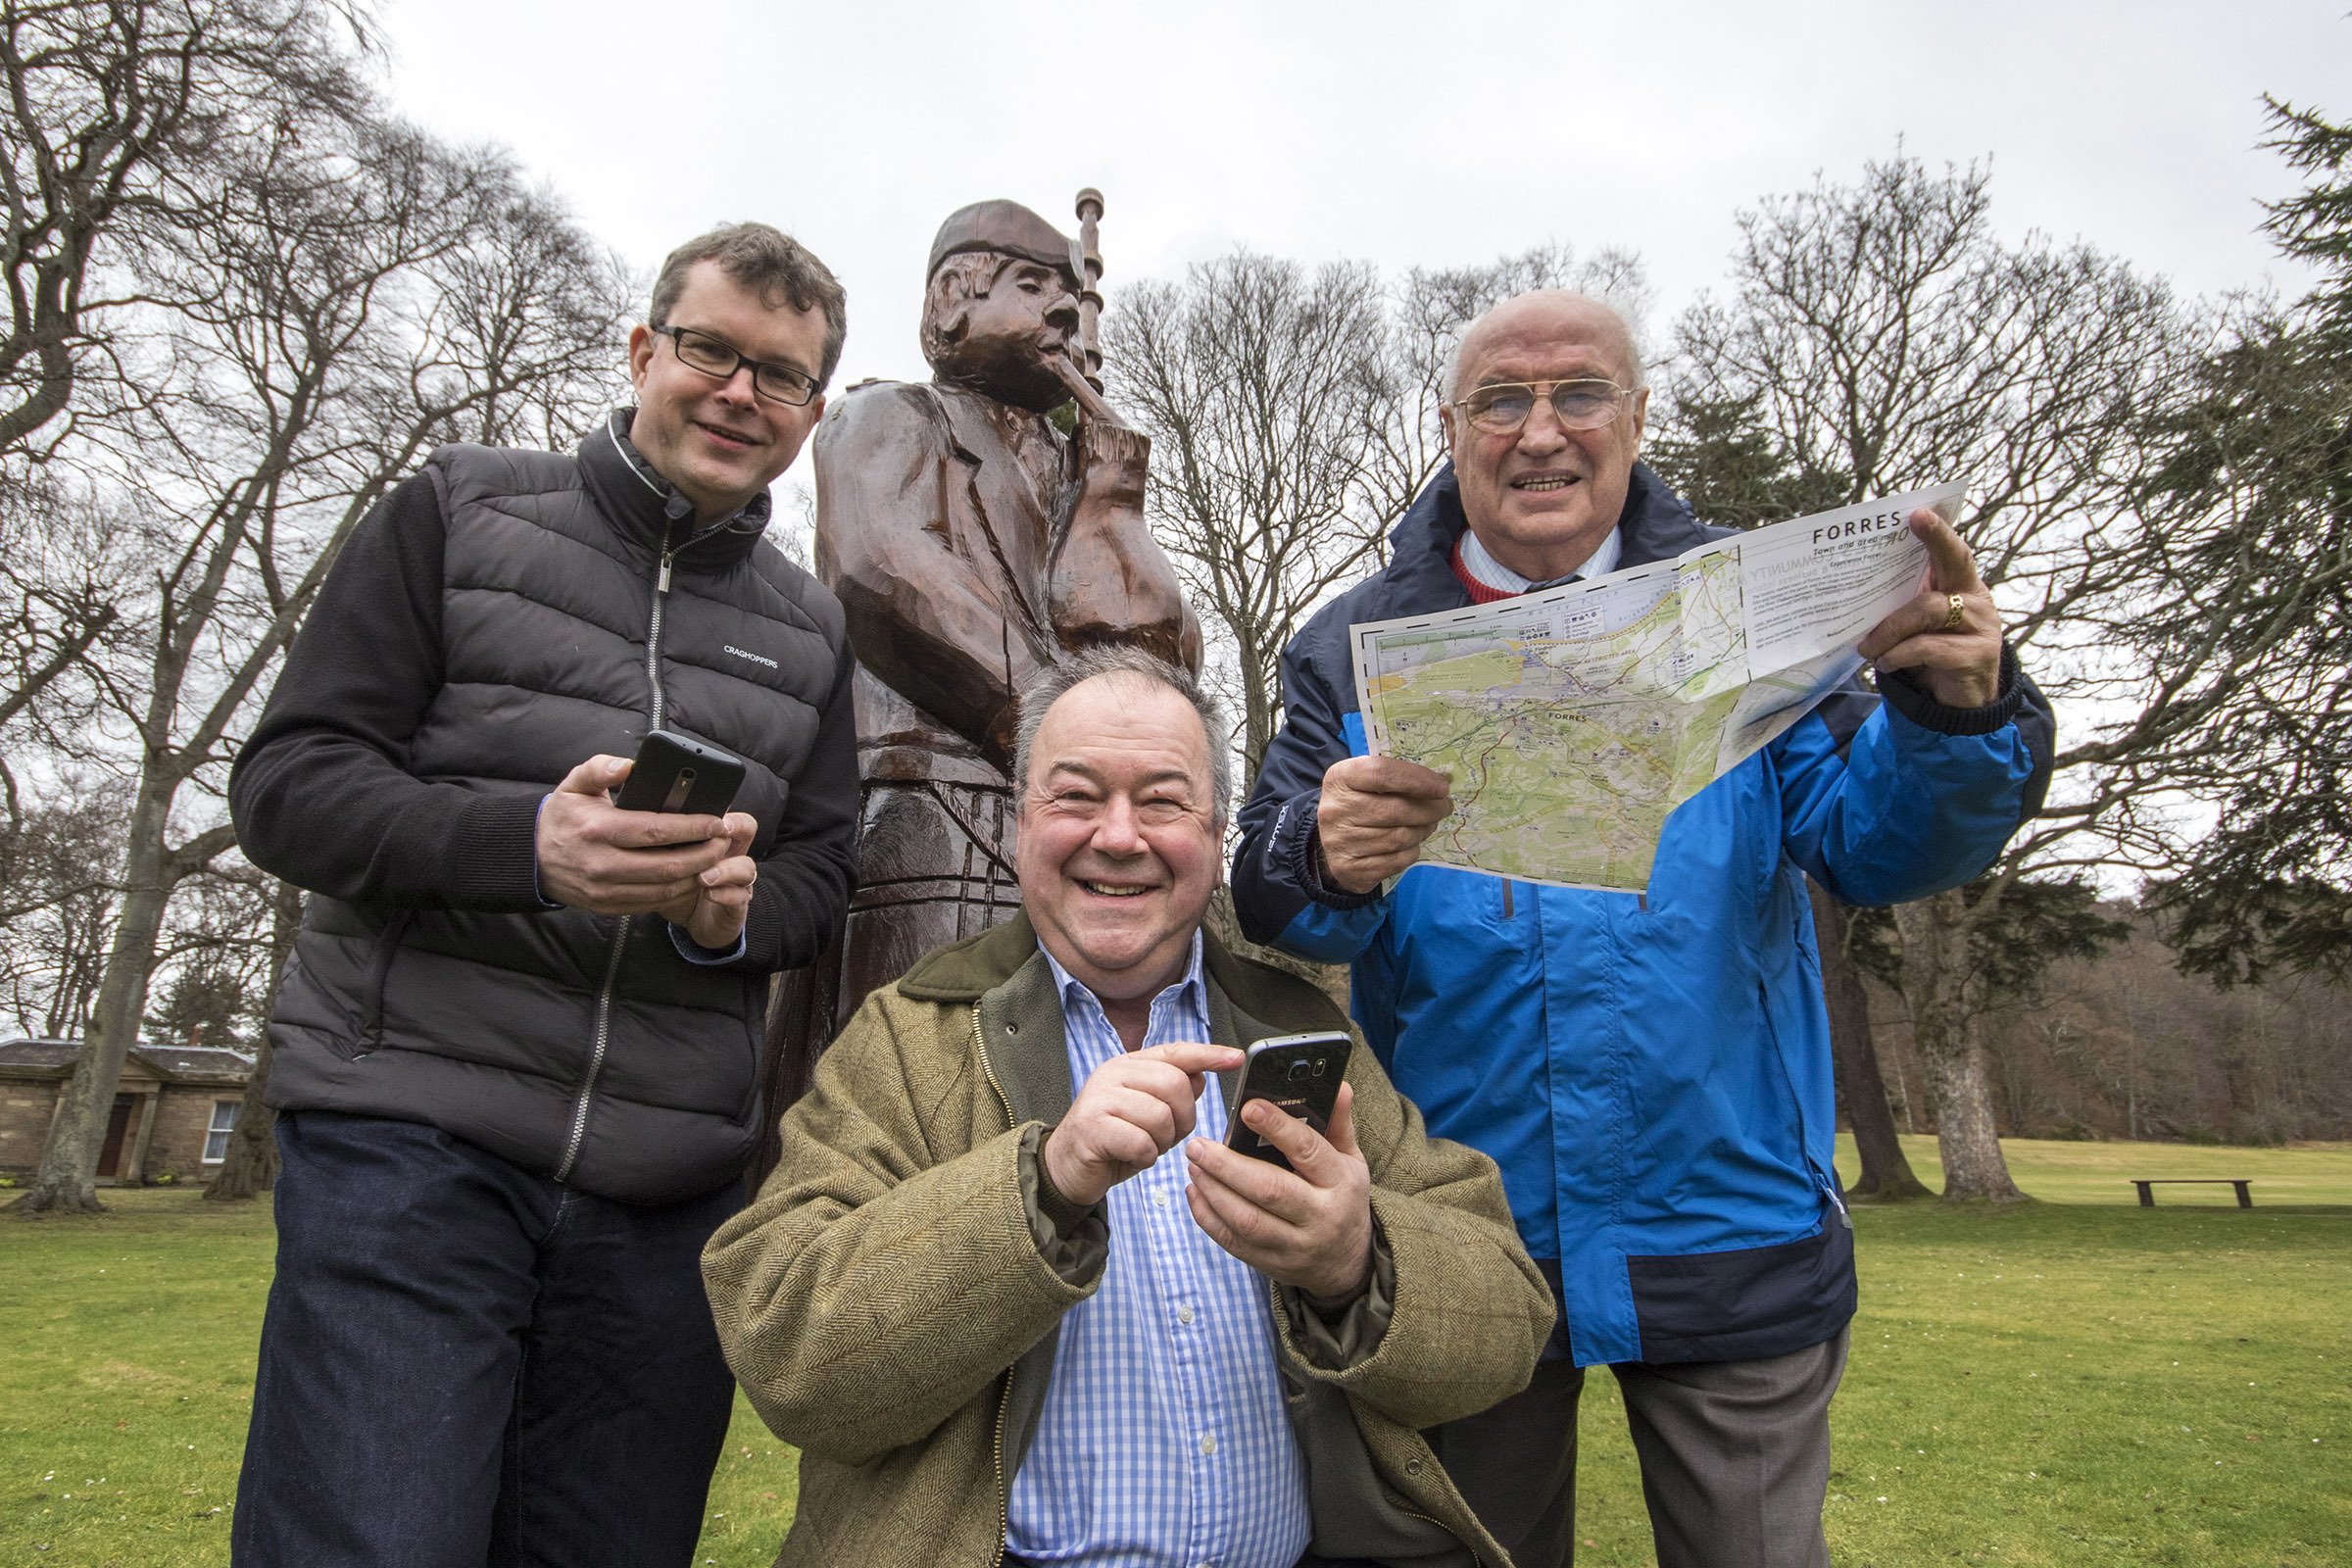 App developer David Sim, Forres Events director Eddie Tomkinson, and volunteer Paul Johnson plot their Piping at Forres day using the new trail.